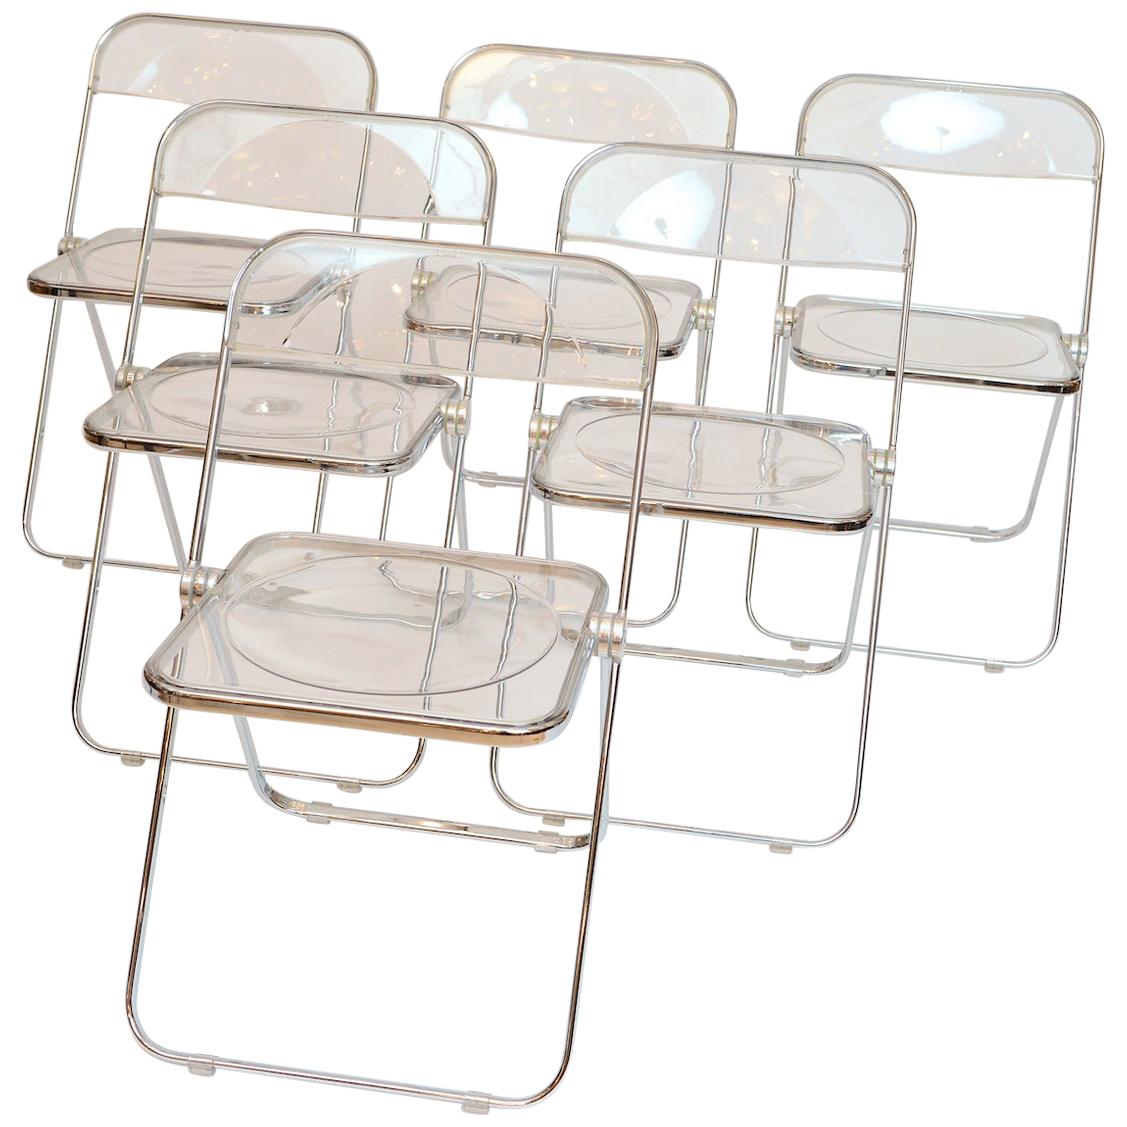 Plia Folding Lucite and Chrome Chairs, 1967